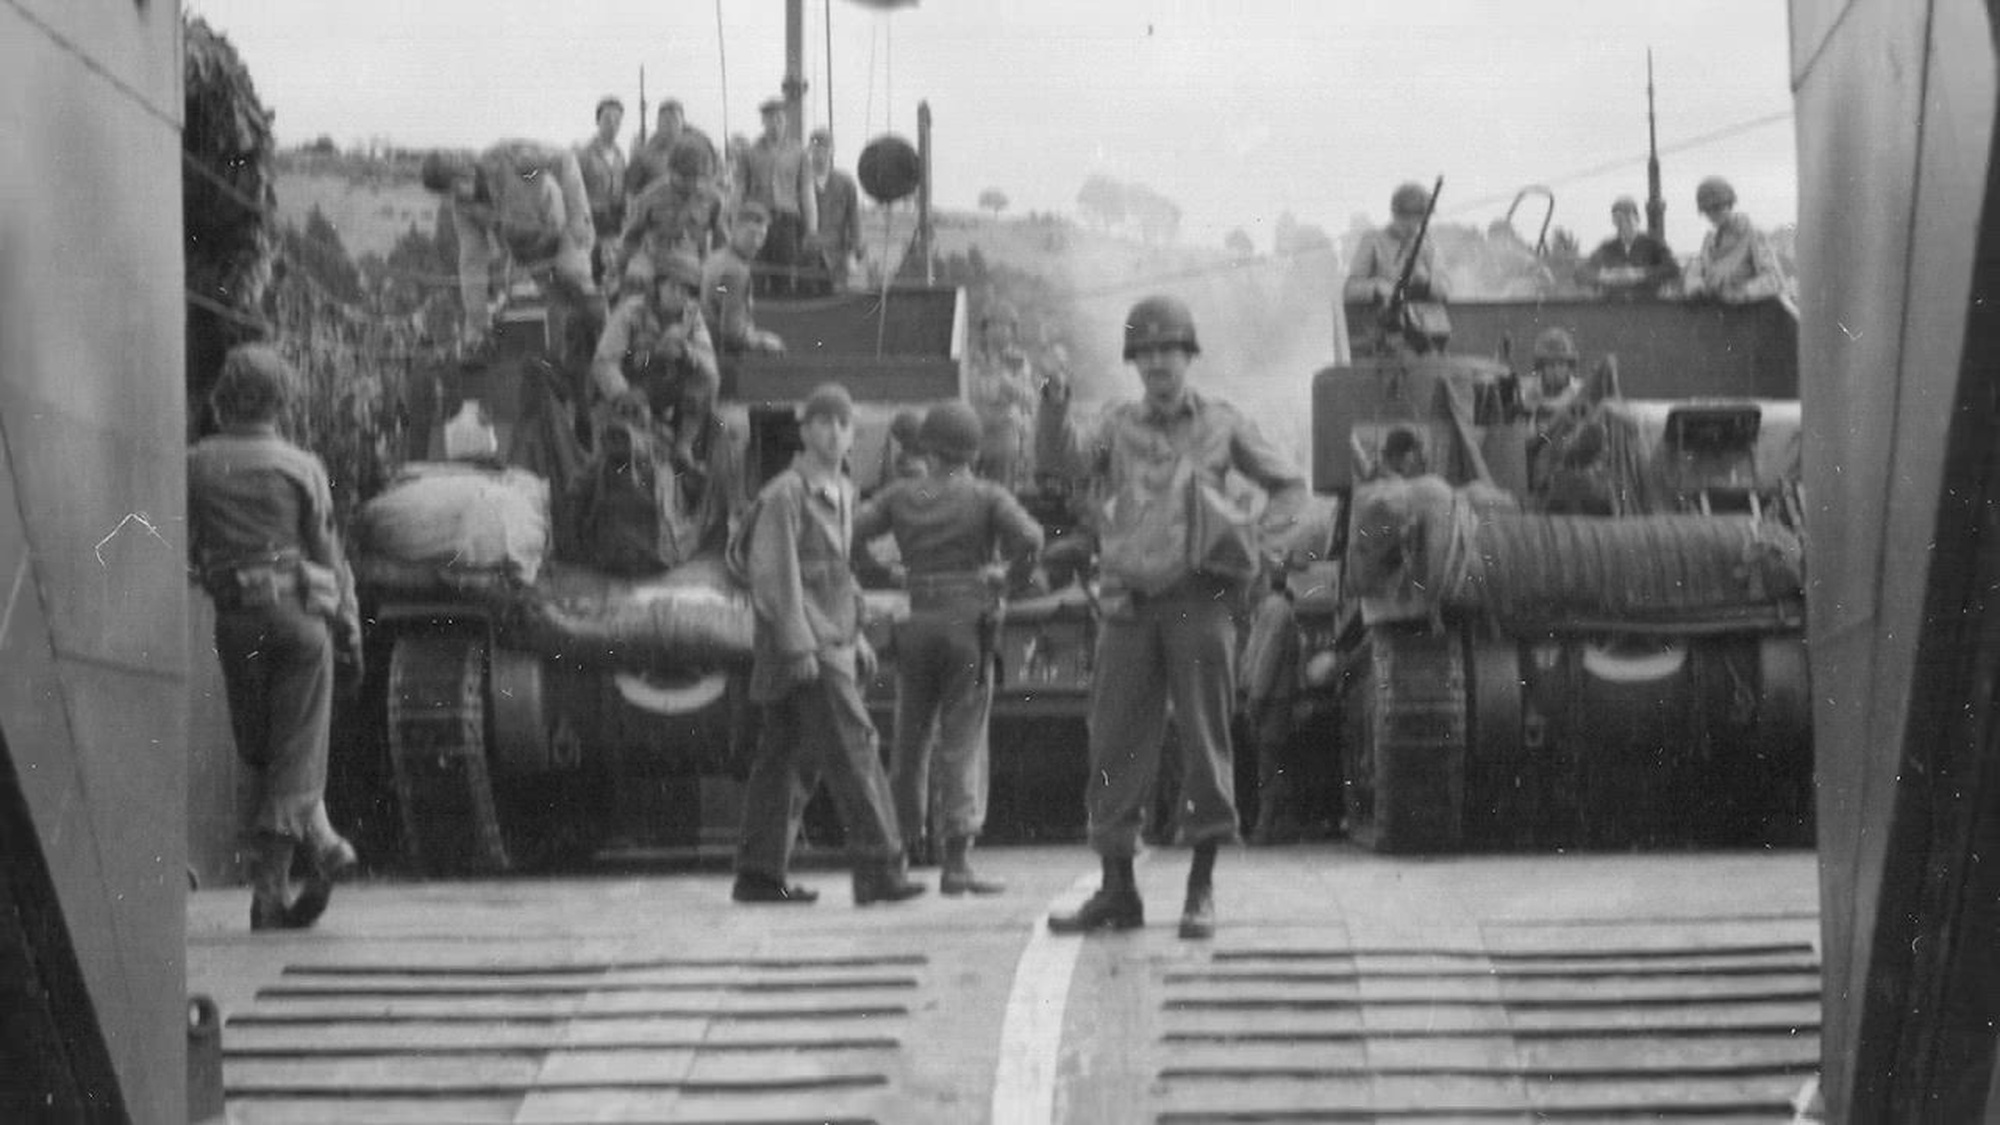 There are already tons of films about 6 June 1944.  That’s why our documentary is about what happened before the Normandy invasion.  Allied planners spent years analyzing changing tides, perilous terrain, and German fortifications along the Atlantic Wall to figure out the best time and place to come ashore.  Even basic logistics were a nightmare.  Over a million soldiers had to be shipped to the United Kingdom, and then equipped and fed.  Paying heed to Allied leadership from COSSAC to SHAEF, our film examines how the plan for one of the largest invasions in history was changing clear up to D-Day.   

Created in collaboration with the Combined Arms Support Command (CASCOM), the film outlines important Army doctrine such as the Military Decision Making Process (MDMP), the Intelligence Preparation of the Battlefield (IPB), and the Sustainment Preparation of the Operational Environment.